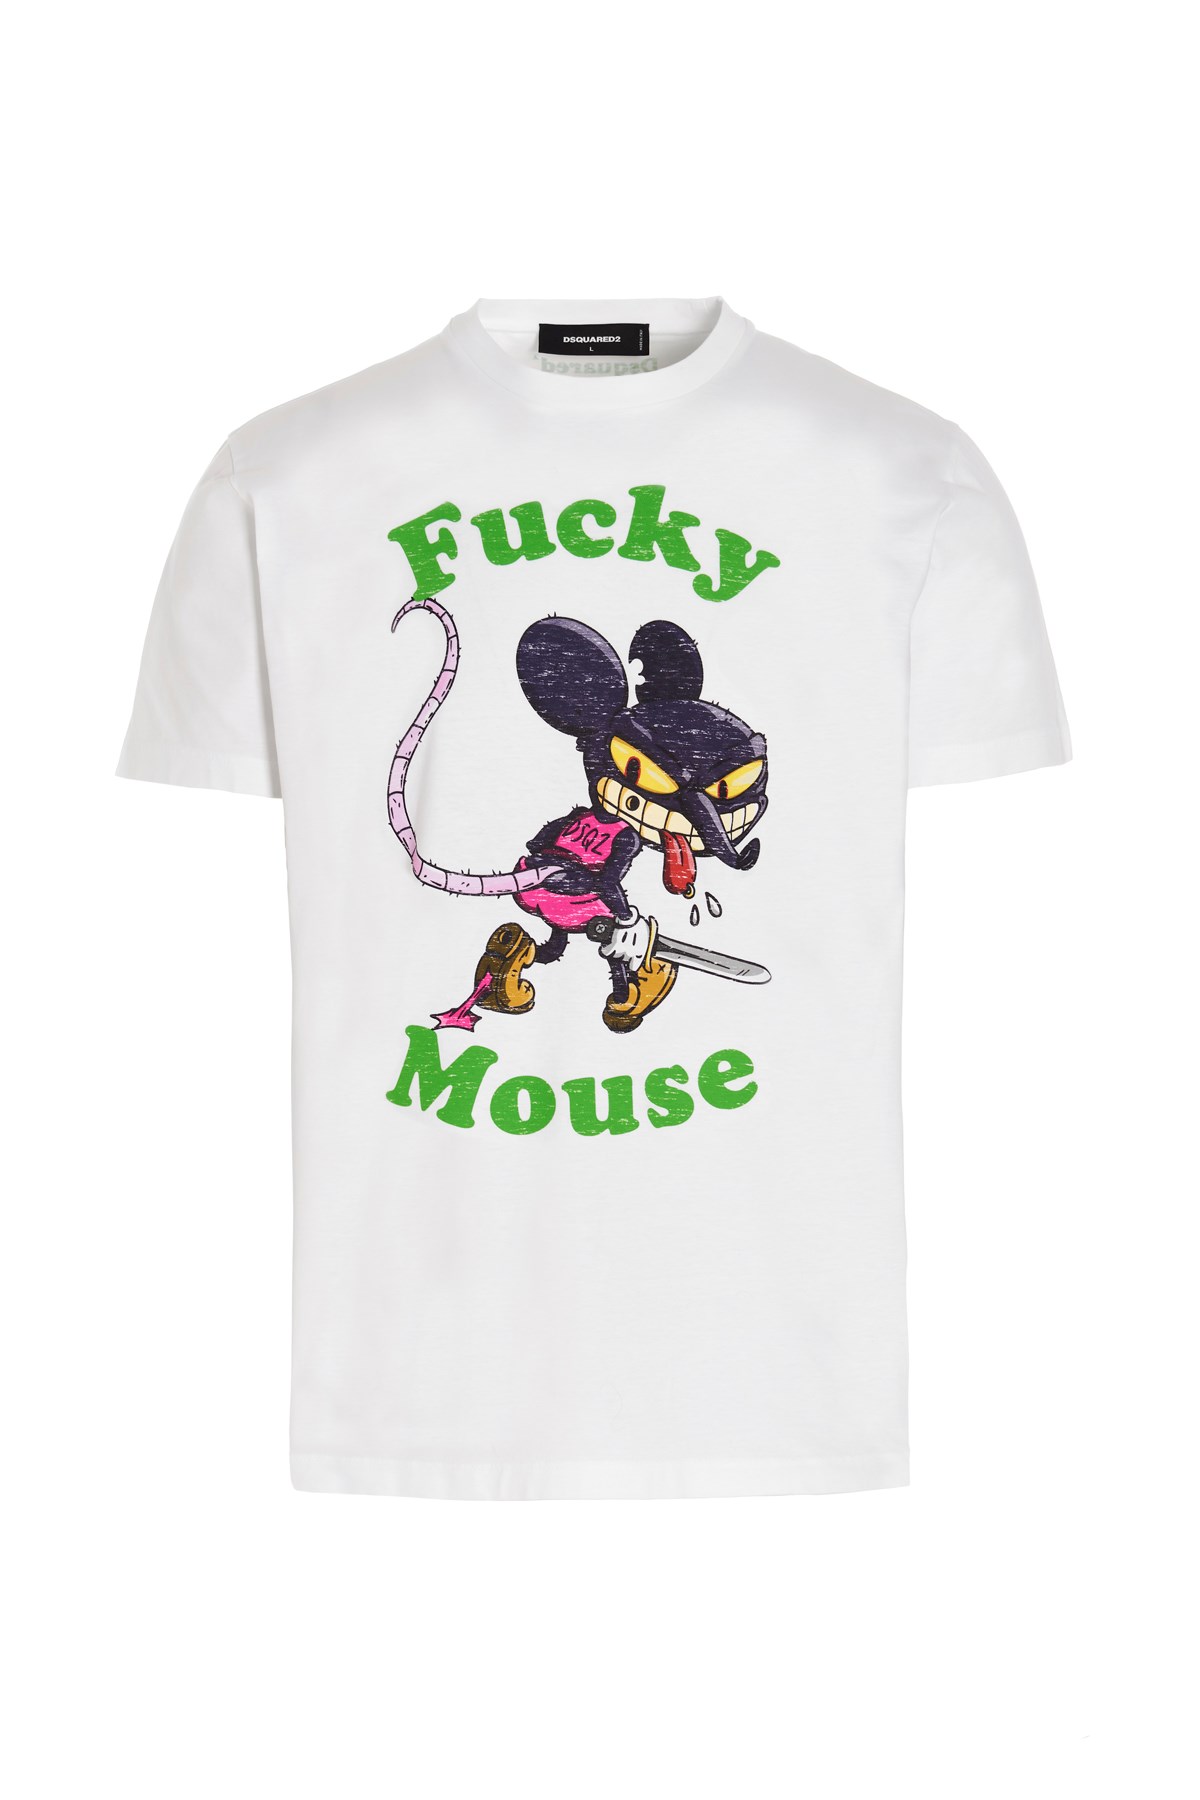 DSQUARED2 T-Shirt 'Sky Mouse'